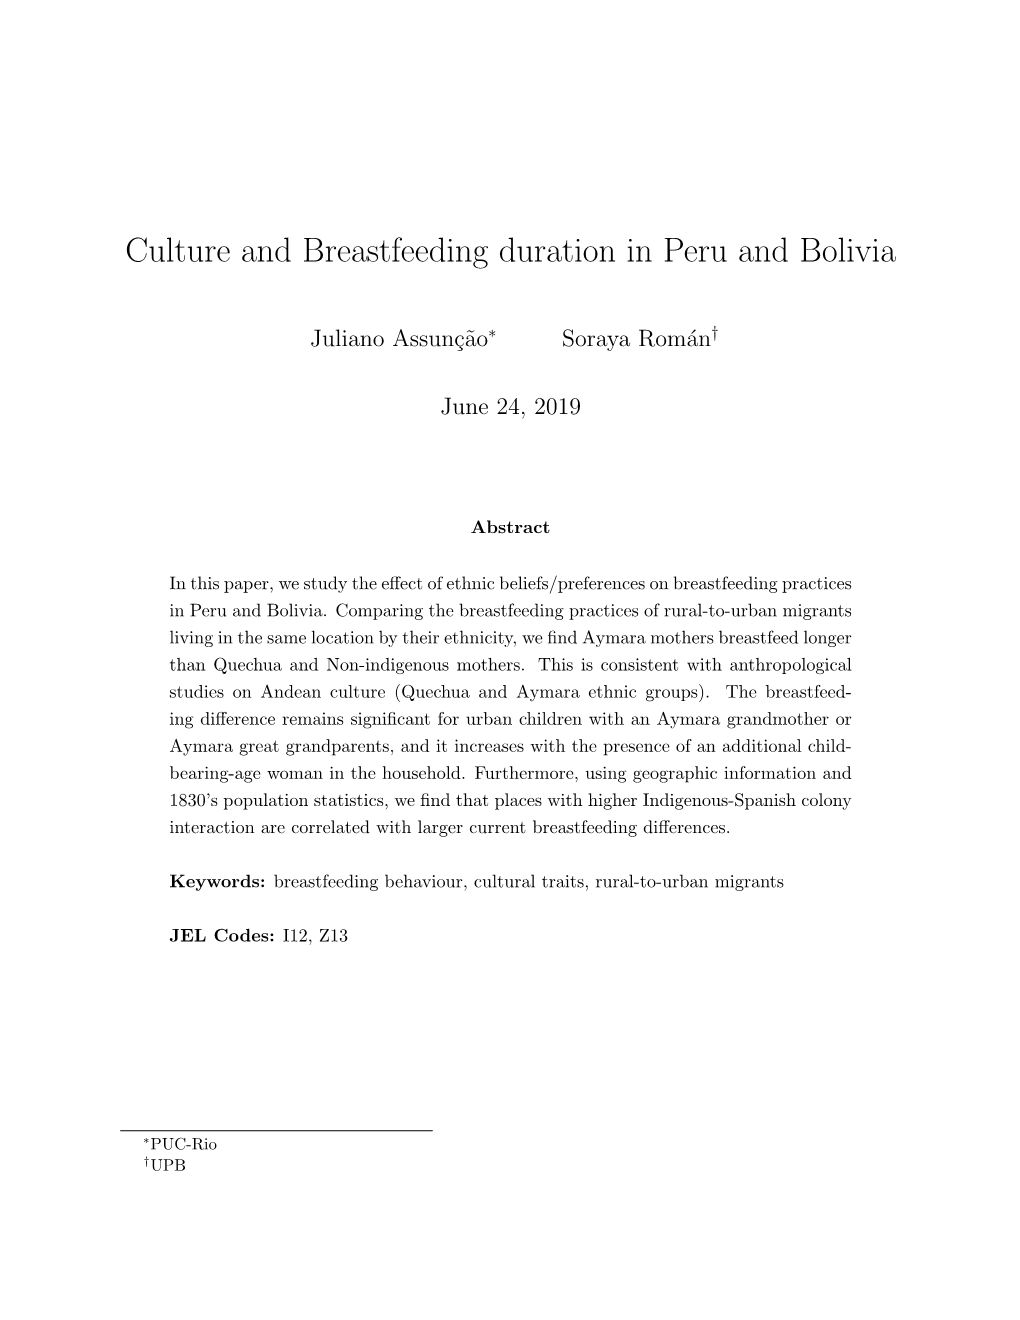 Culture and Breastfeeding Duration in Peru and Bolivia